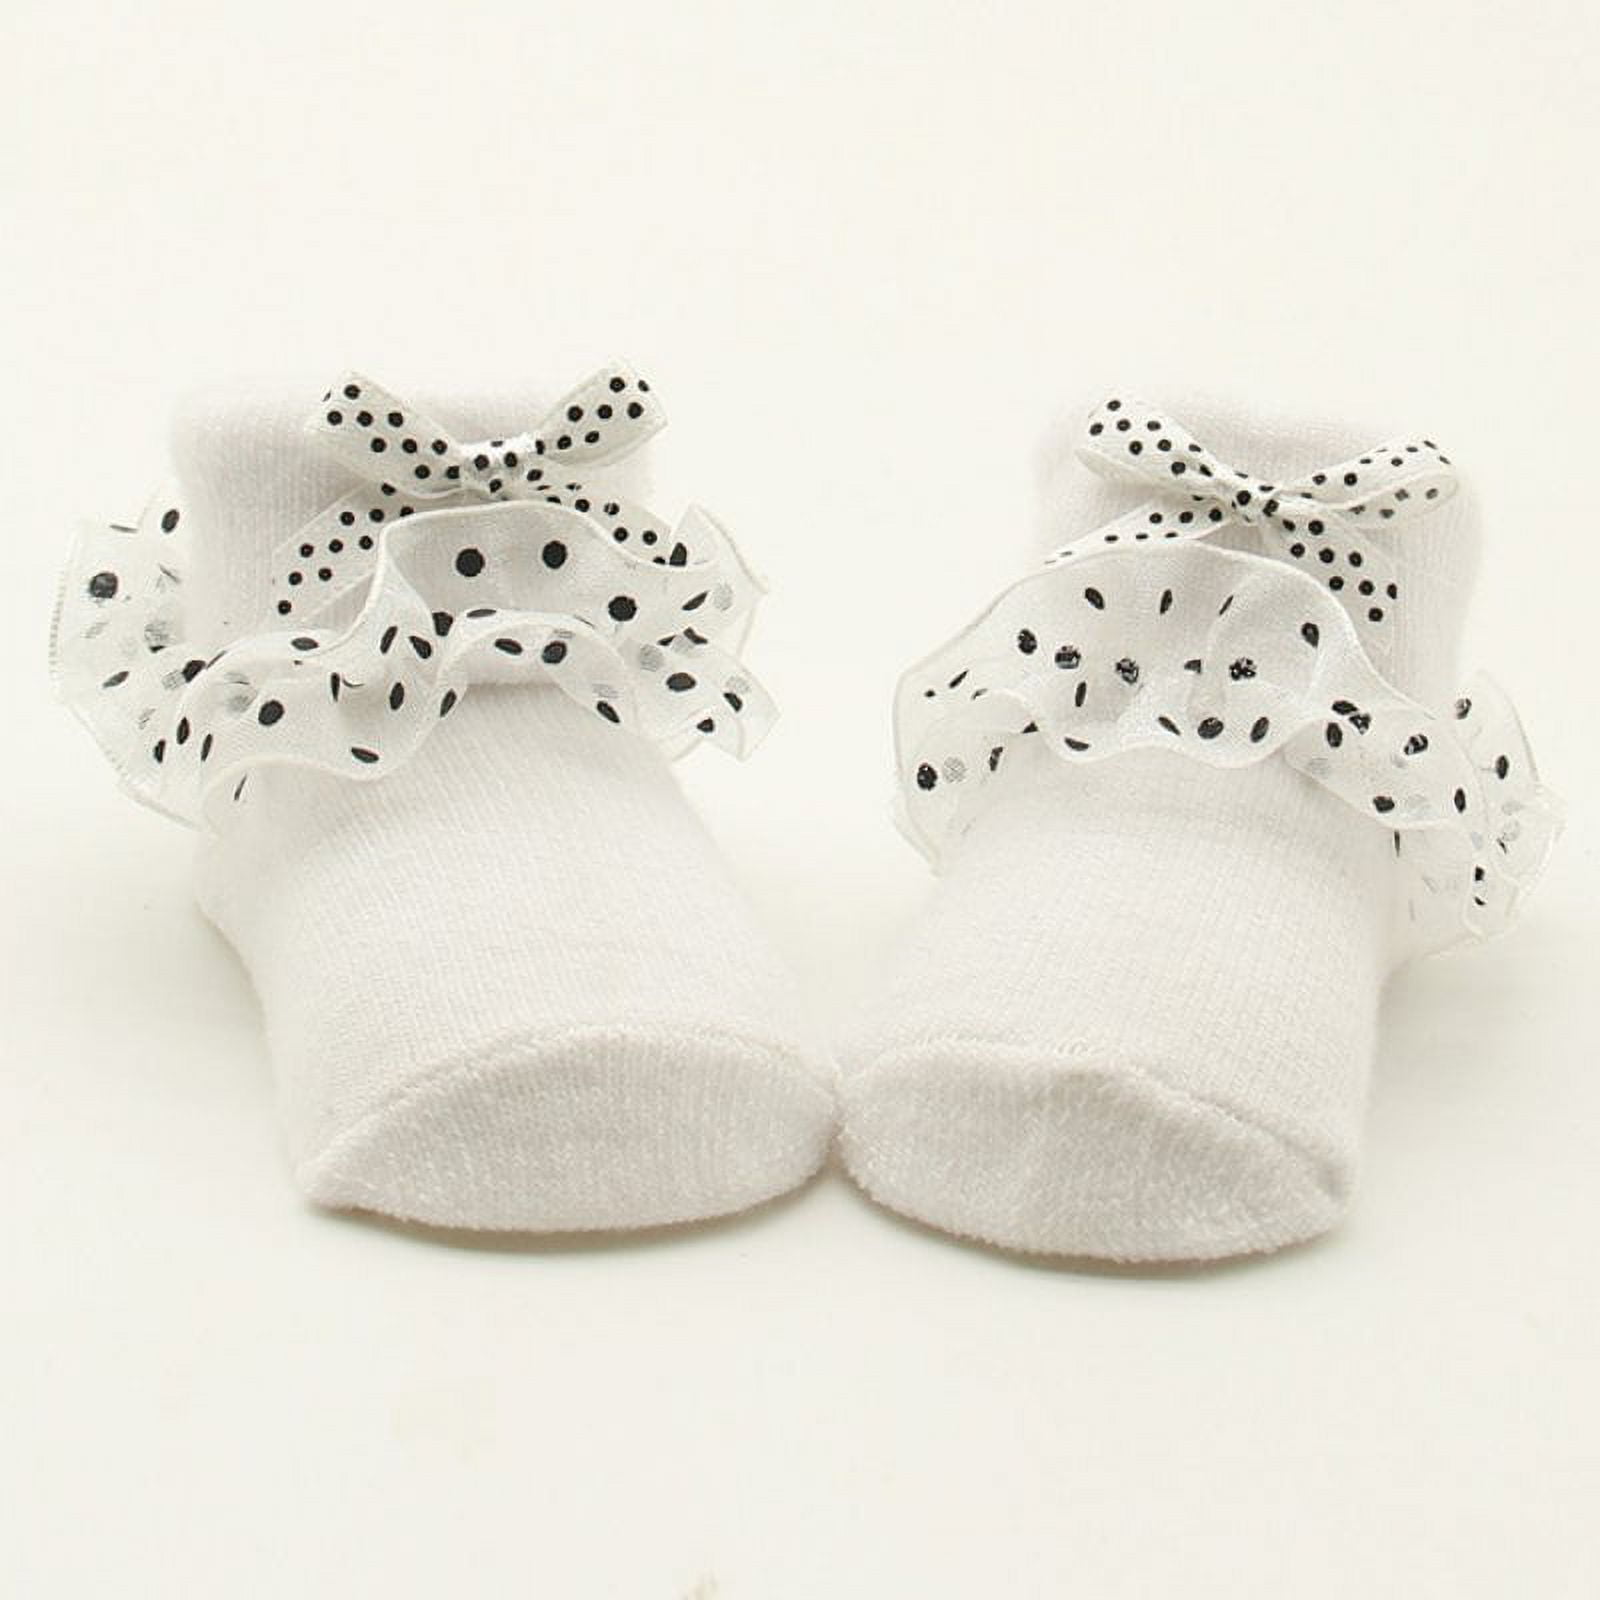 FreshFoot Cute and Colourful New Born Baby socks Set 0 to 6 months, (Size  0-6 Months)(Pack of 6) (Light sade)